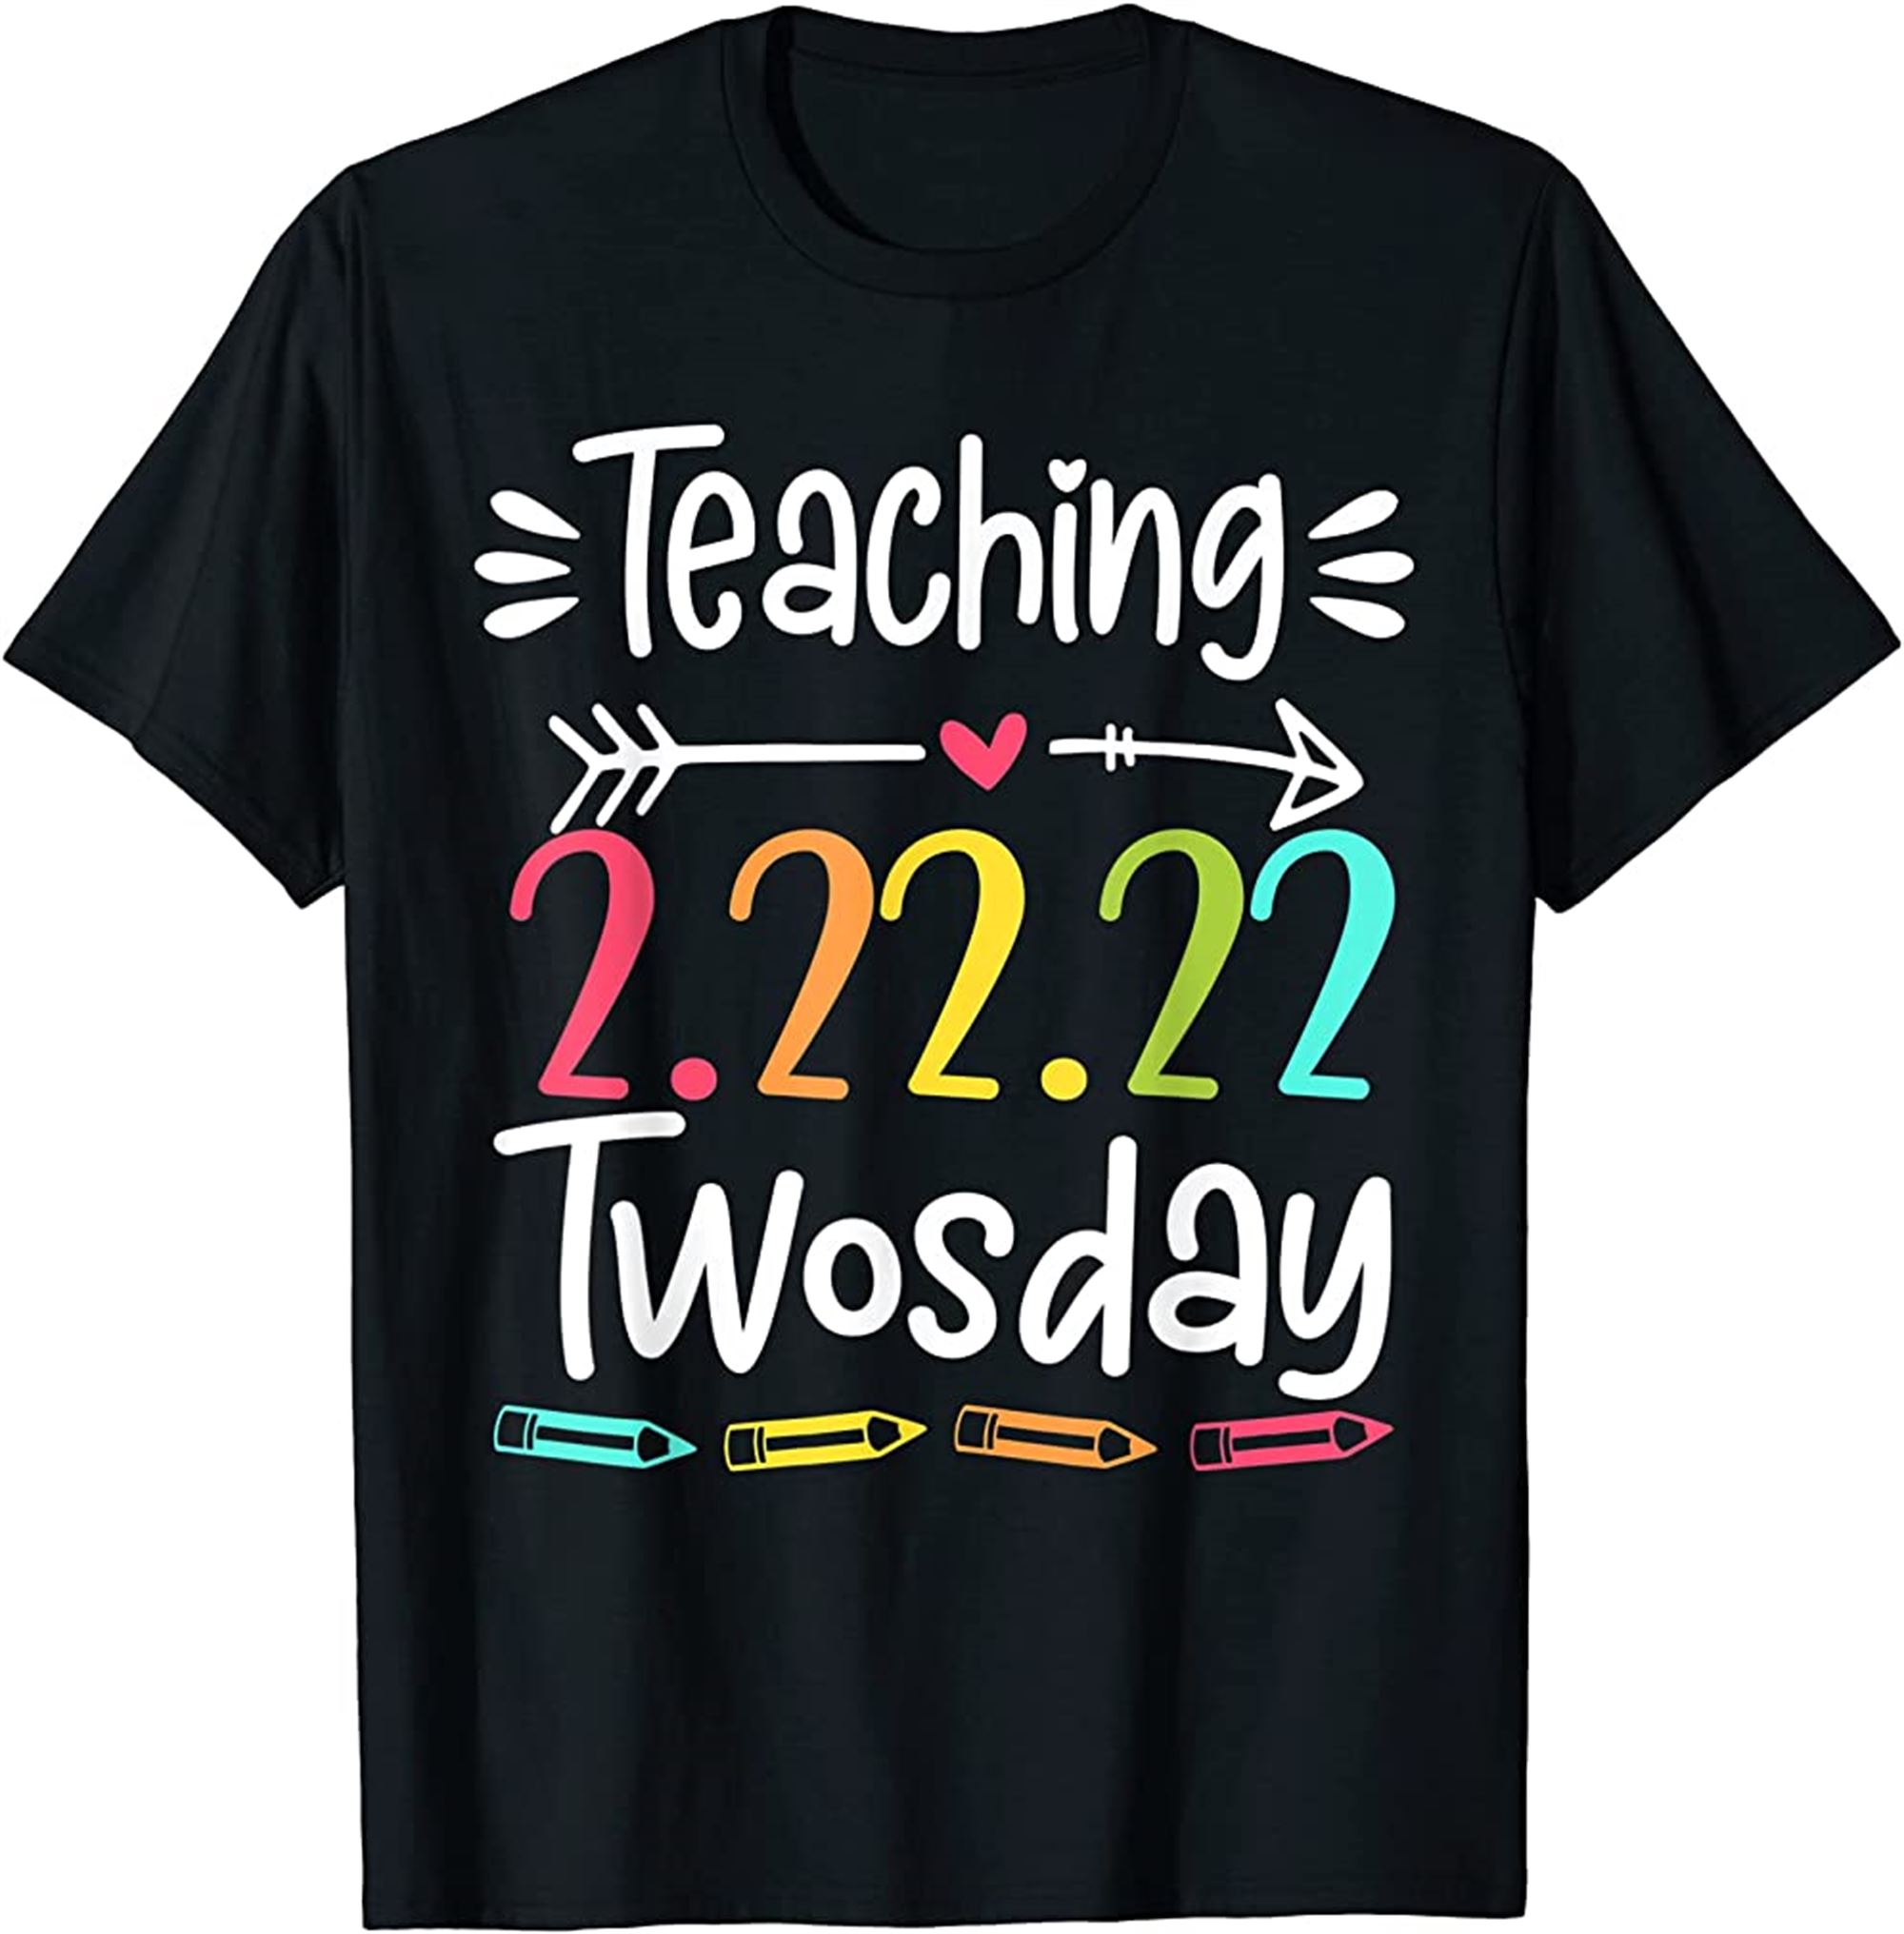 Happy Twosday Tuesday February 22nd 2022 22222 Numerology T-shirt Size Up To 5xl